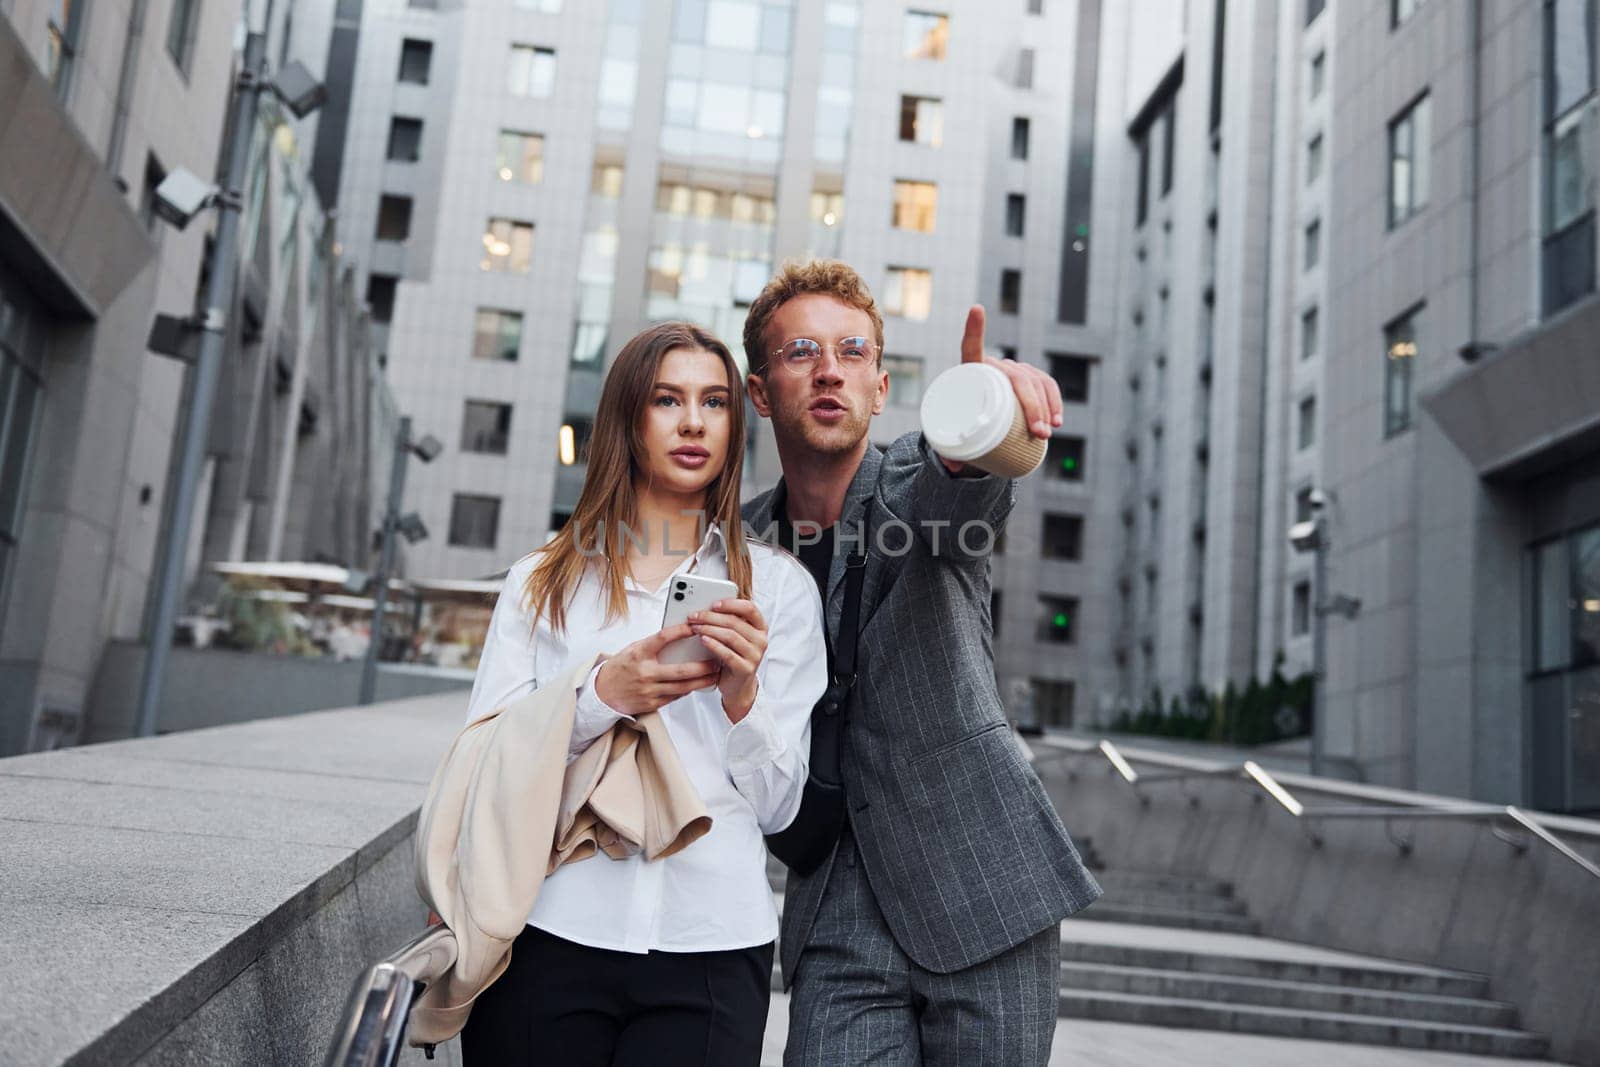 With phone and drink. Woman and man in the town at daytime. Well dressed people by Standret